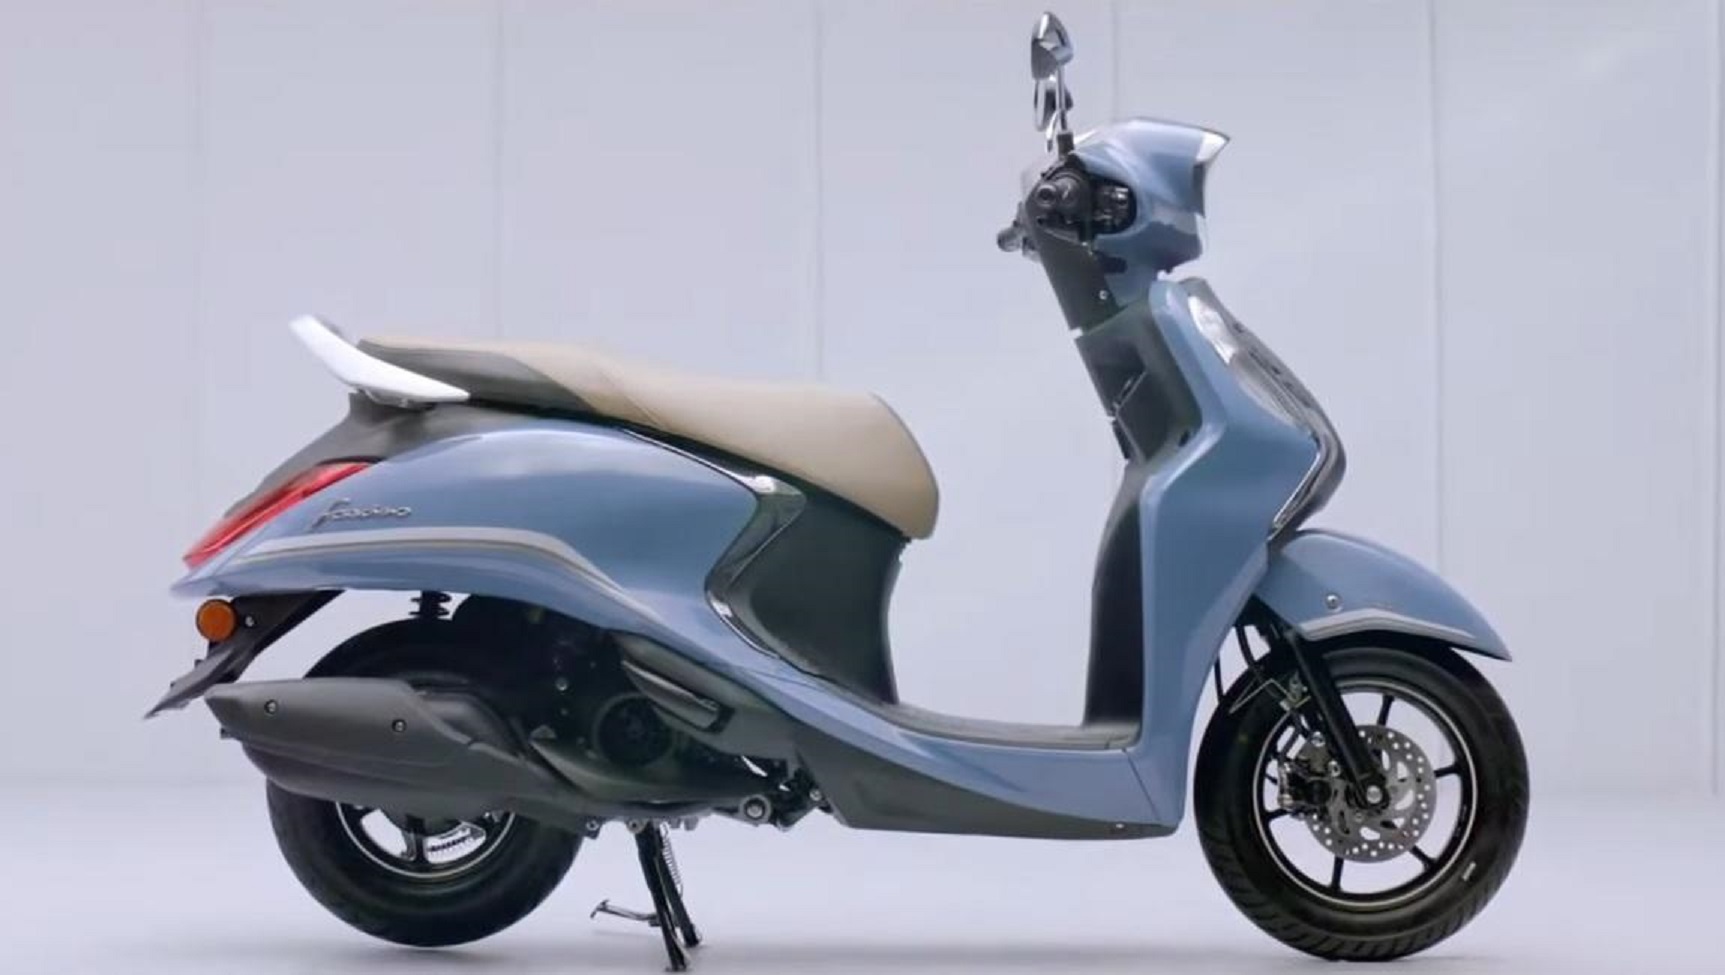 Details of Yamaha’s newly launched scooter model: Eye-catching, equipped and priced to “crush” Honda Vision